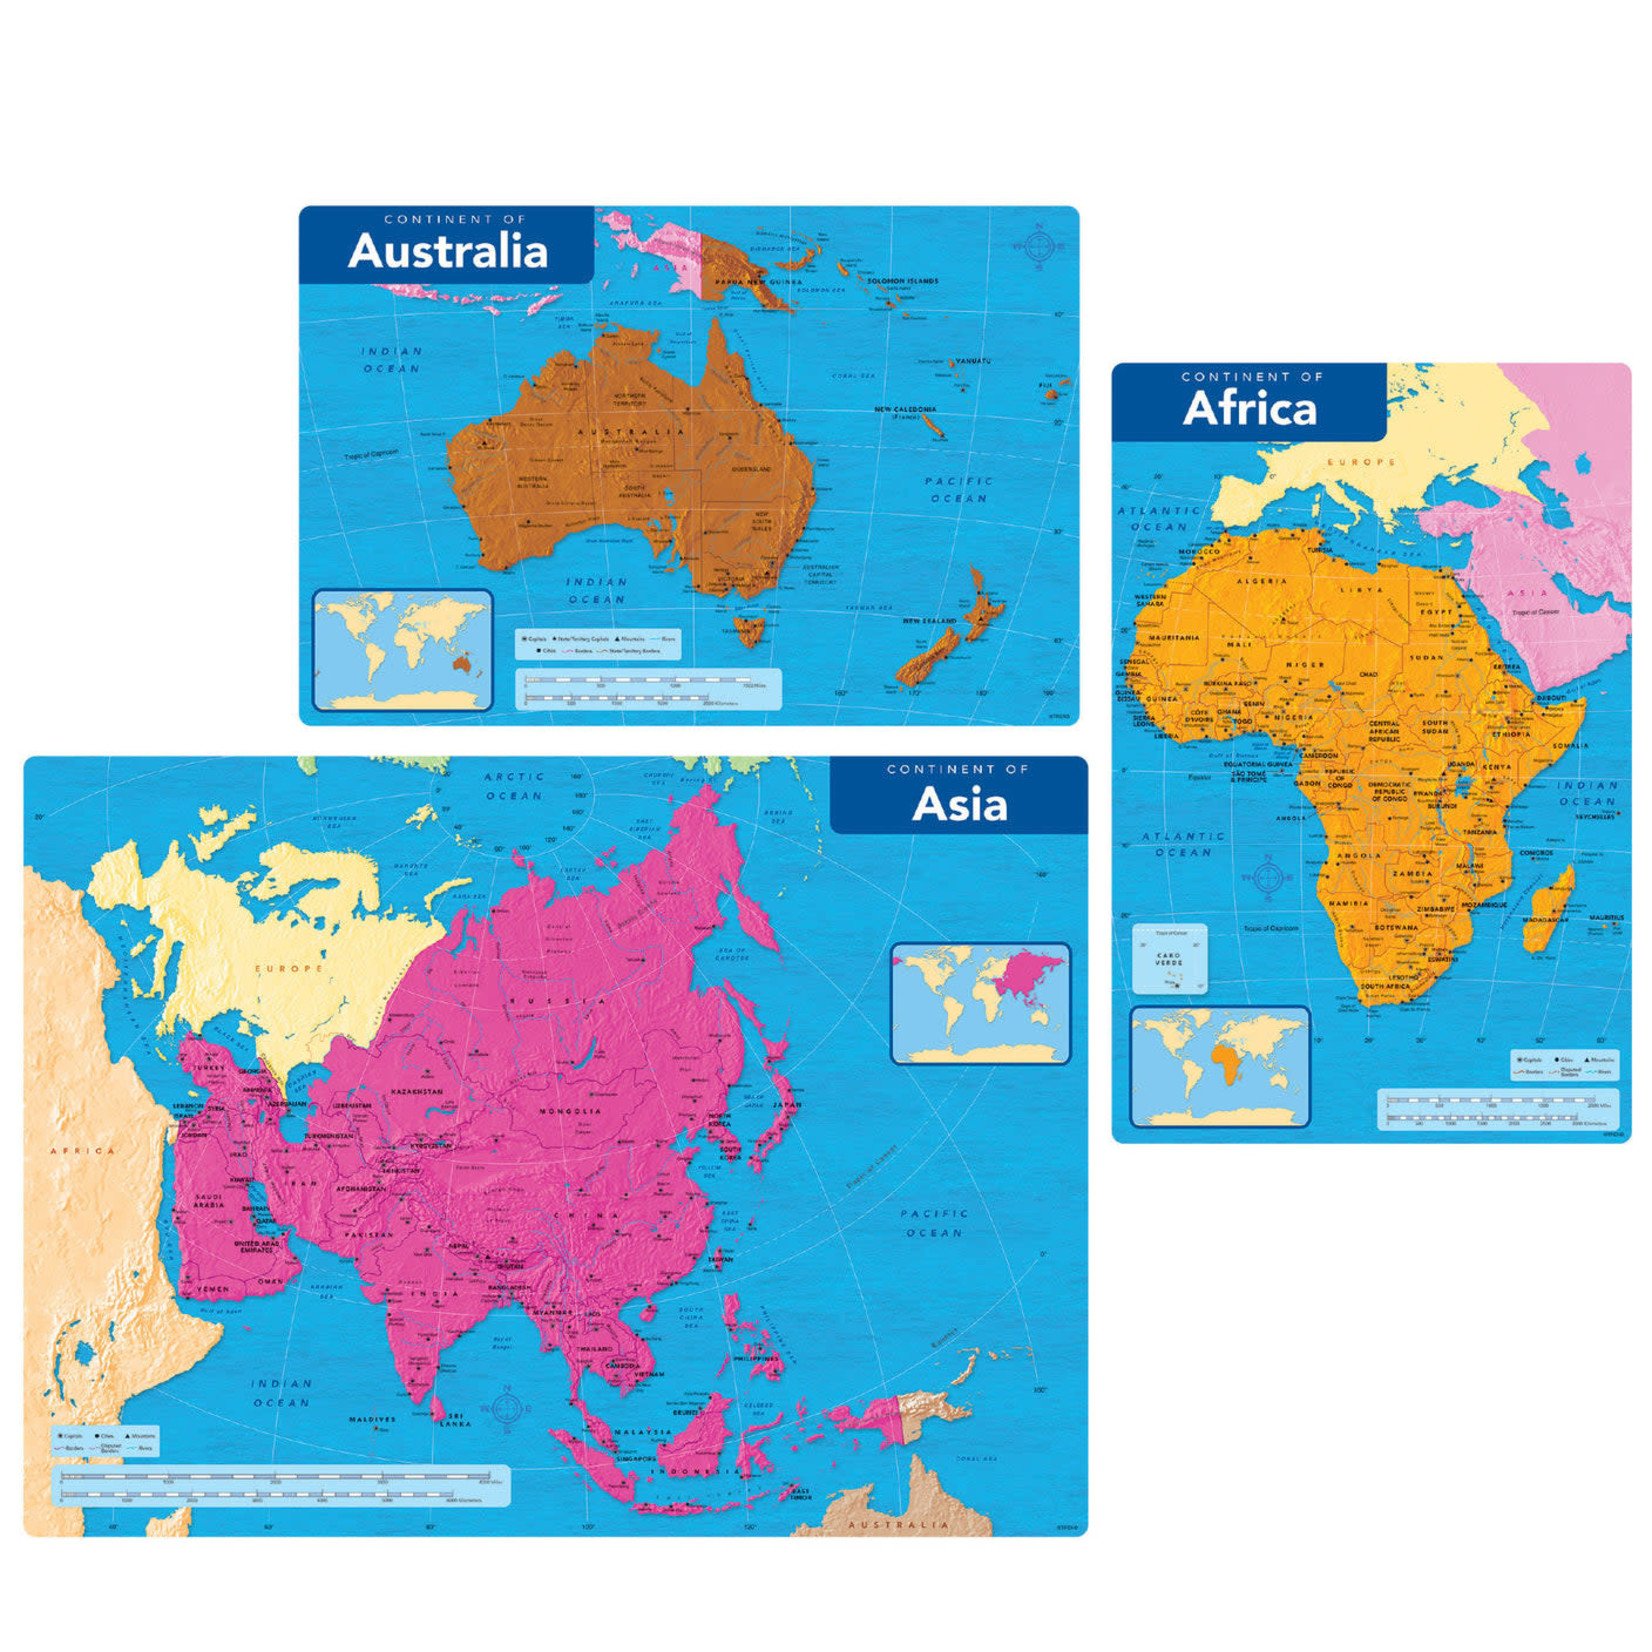 TREND ENTERPRISES INC Continents of the World Learning Set